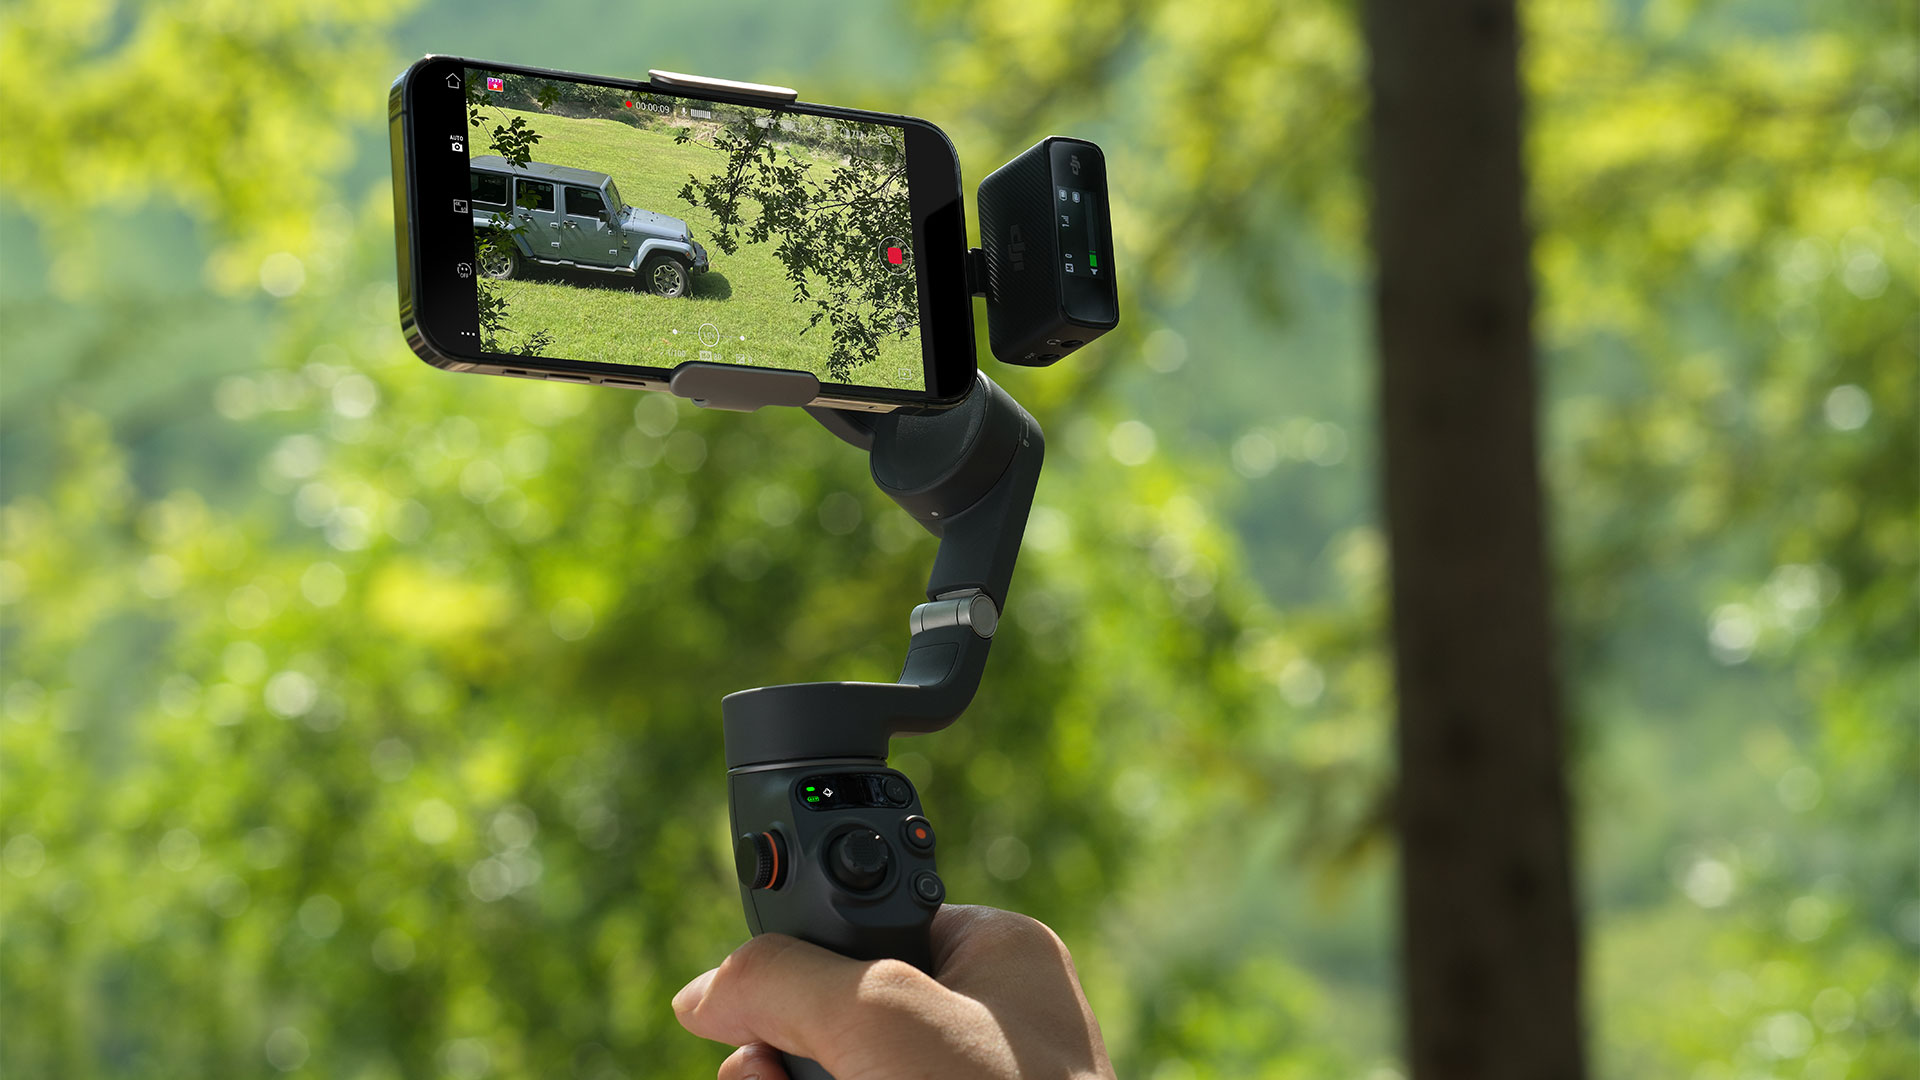 DJI Osmo Mobile 6 Introduced - A New Generation of Smartphone Gimbal | CineD